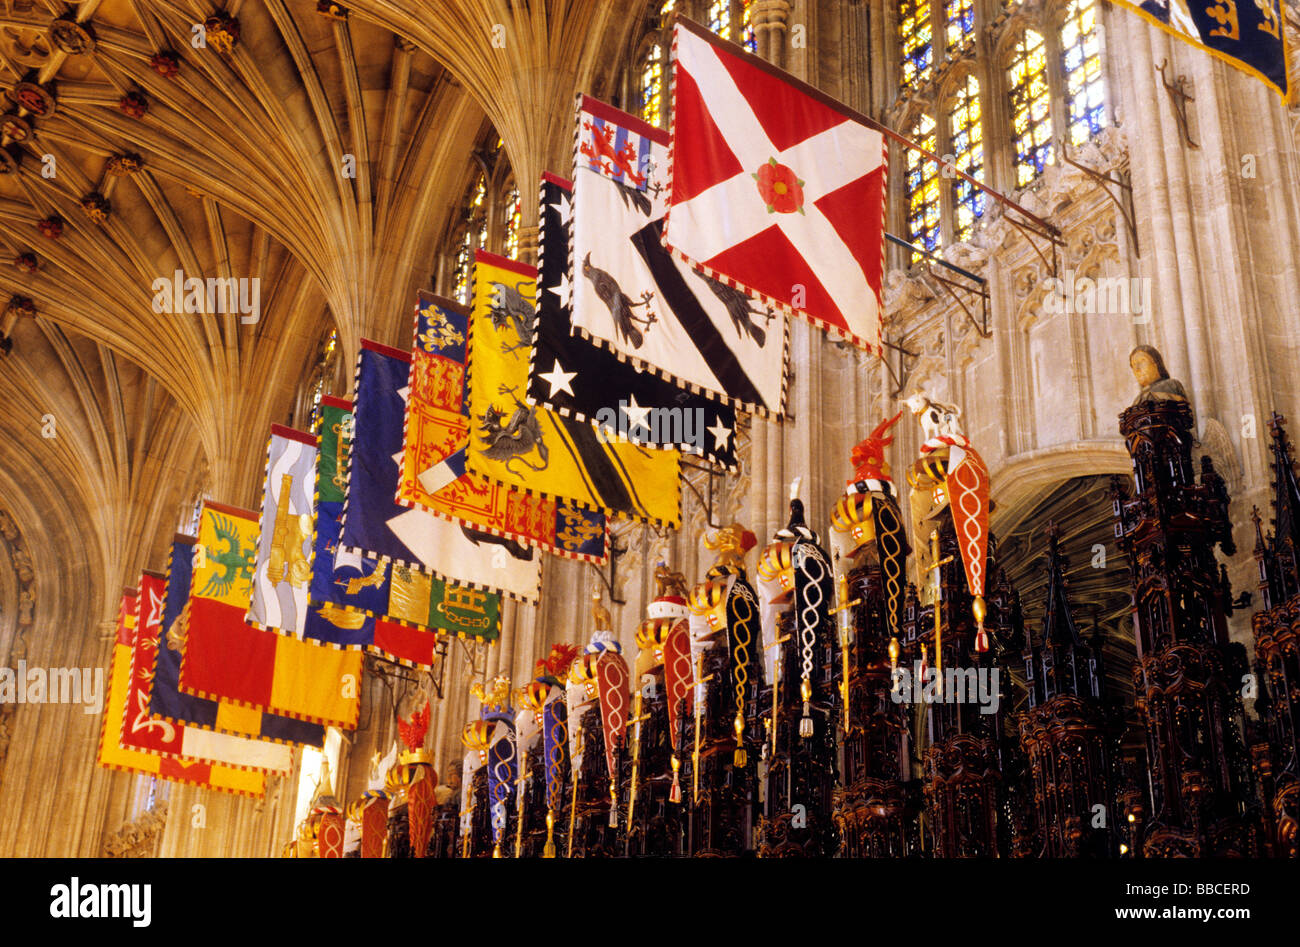 Banners of Knights of the Order of the Garter St George's Chapel Windsor Berkshire England UK interior choir banners flags interiors Stock Photo